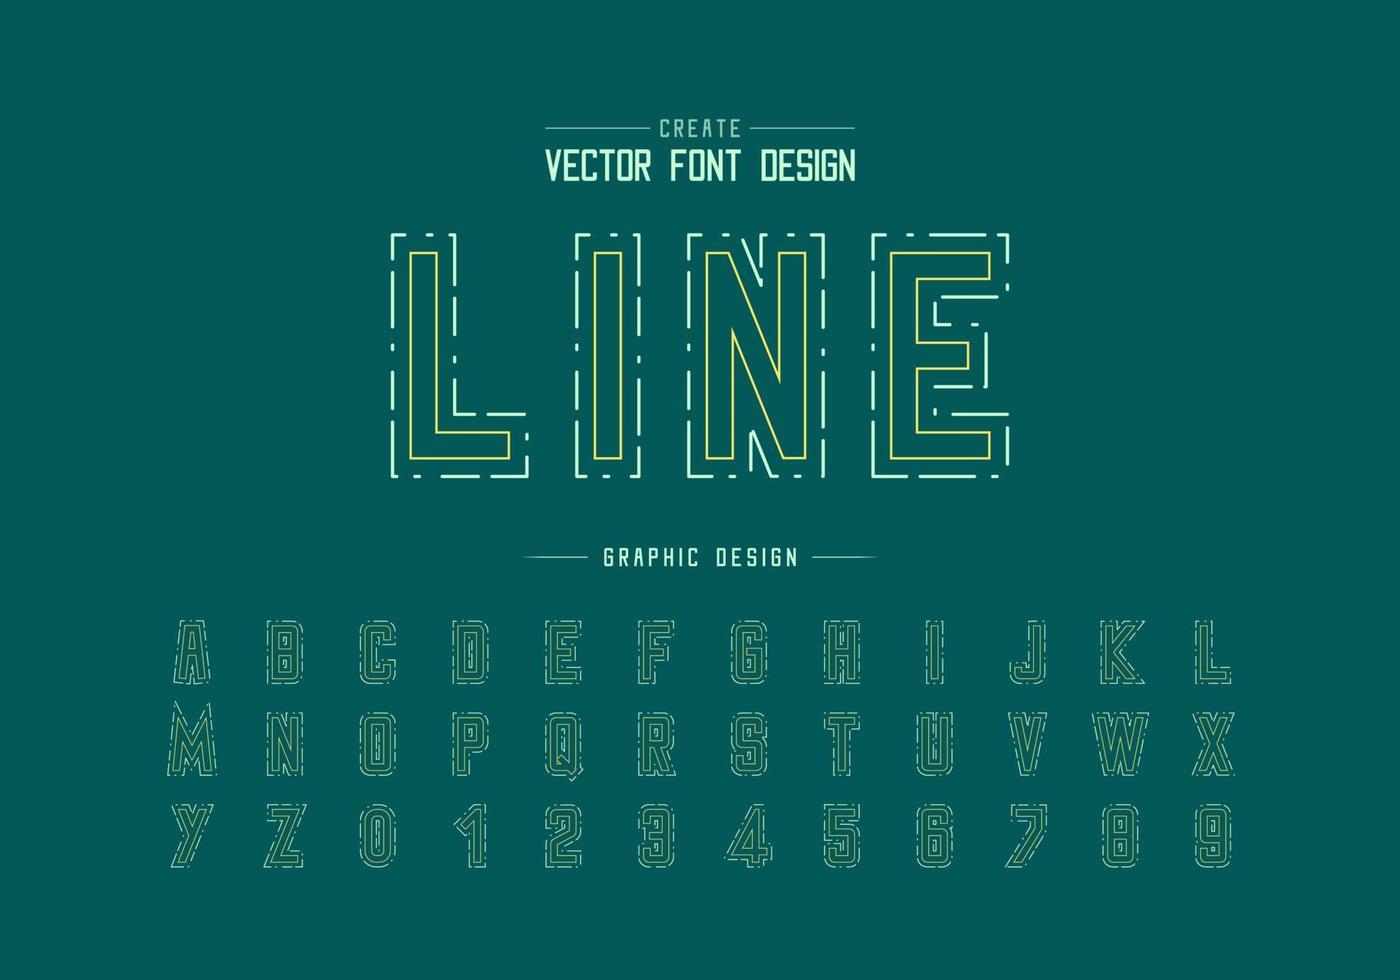 Font and alphabet vector, Typeface and letter number design, Graphic text on background vector